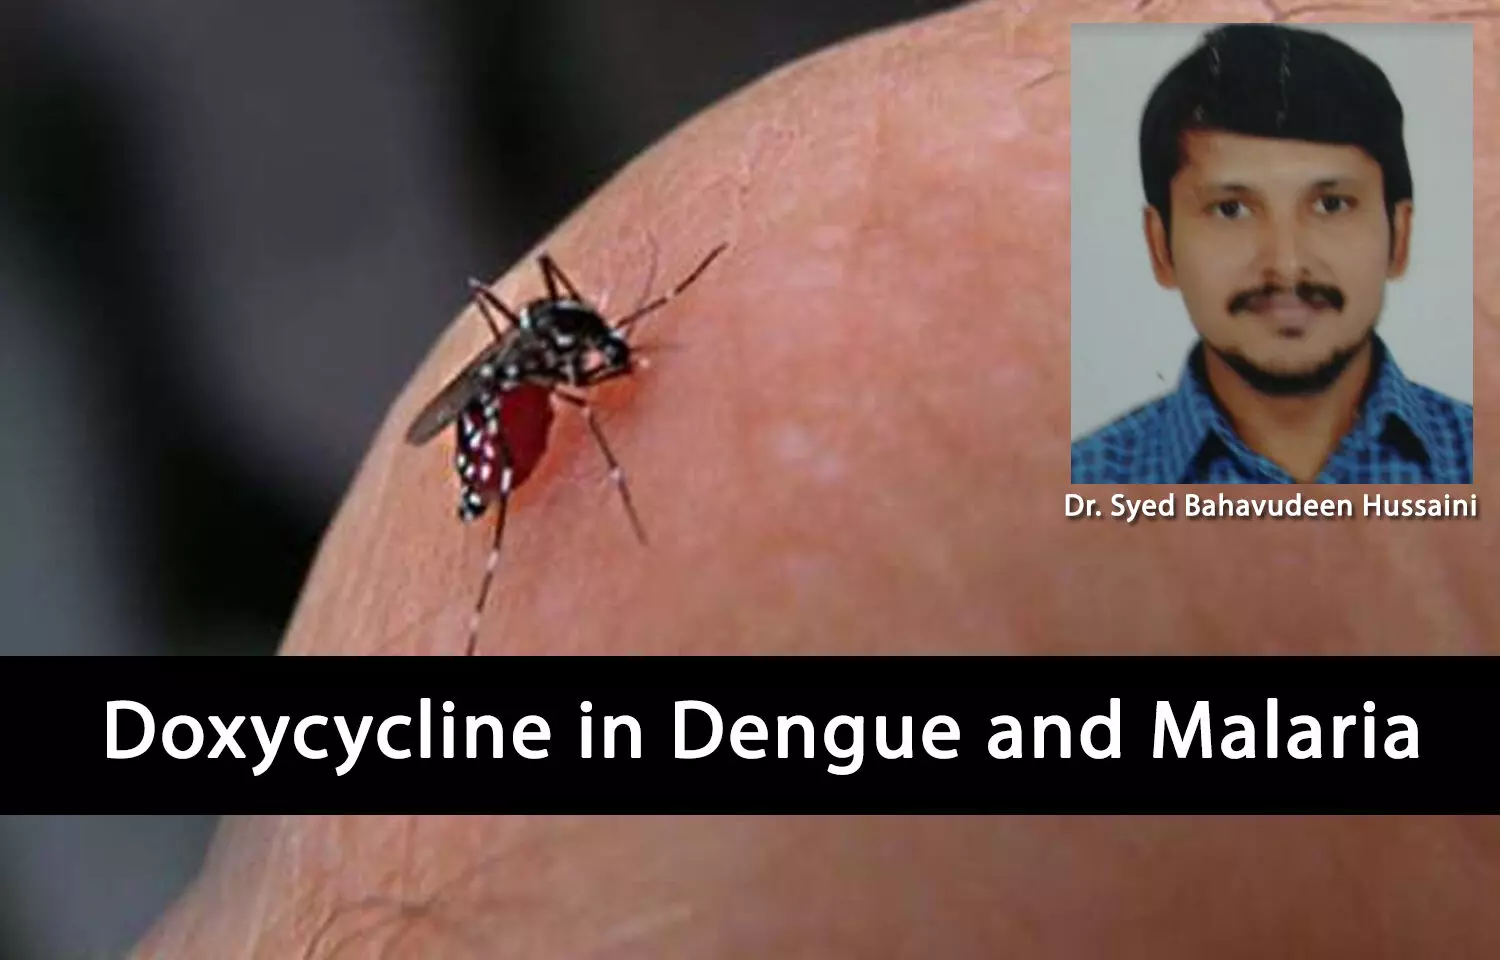 Improving Clinical Outcomes with the Use of Doxycycline in Dengue and Malaria - An Indian Experience